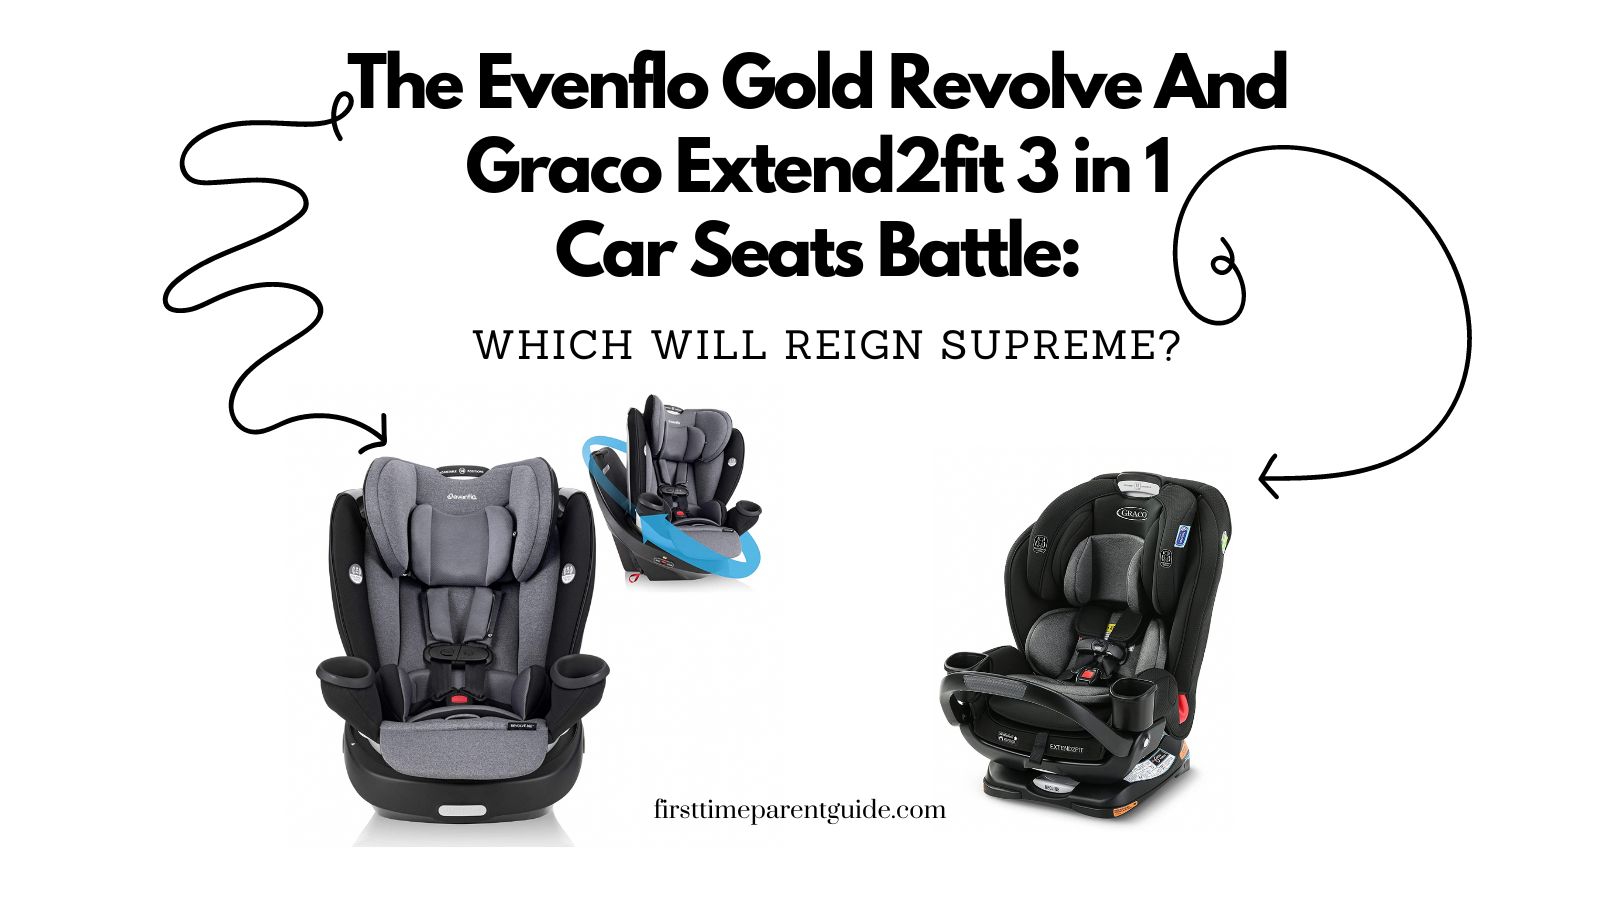 The Evenflo Gold Revolve And